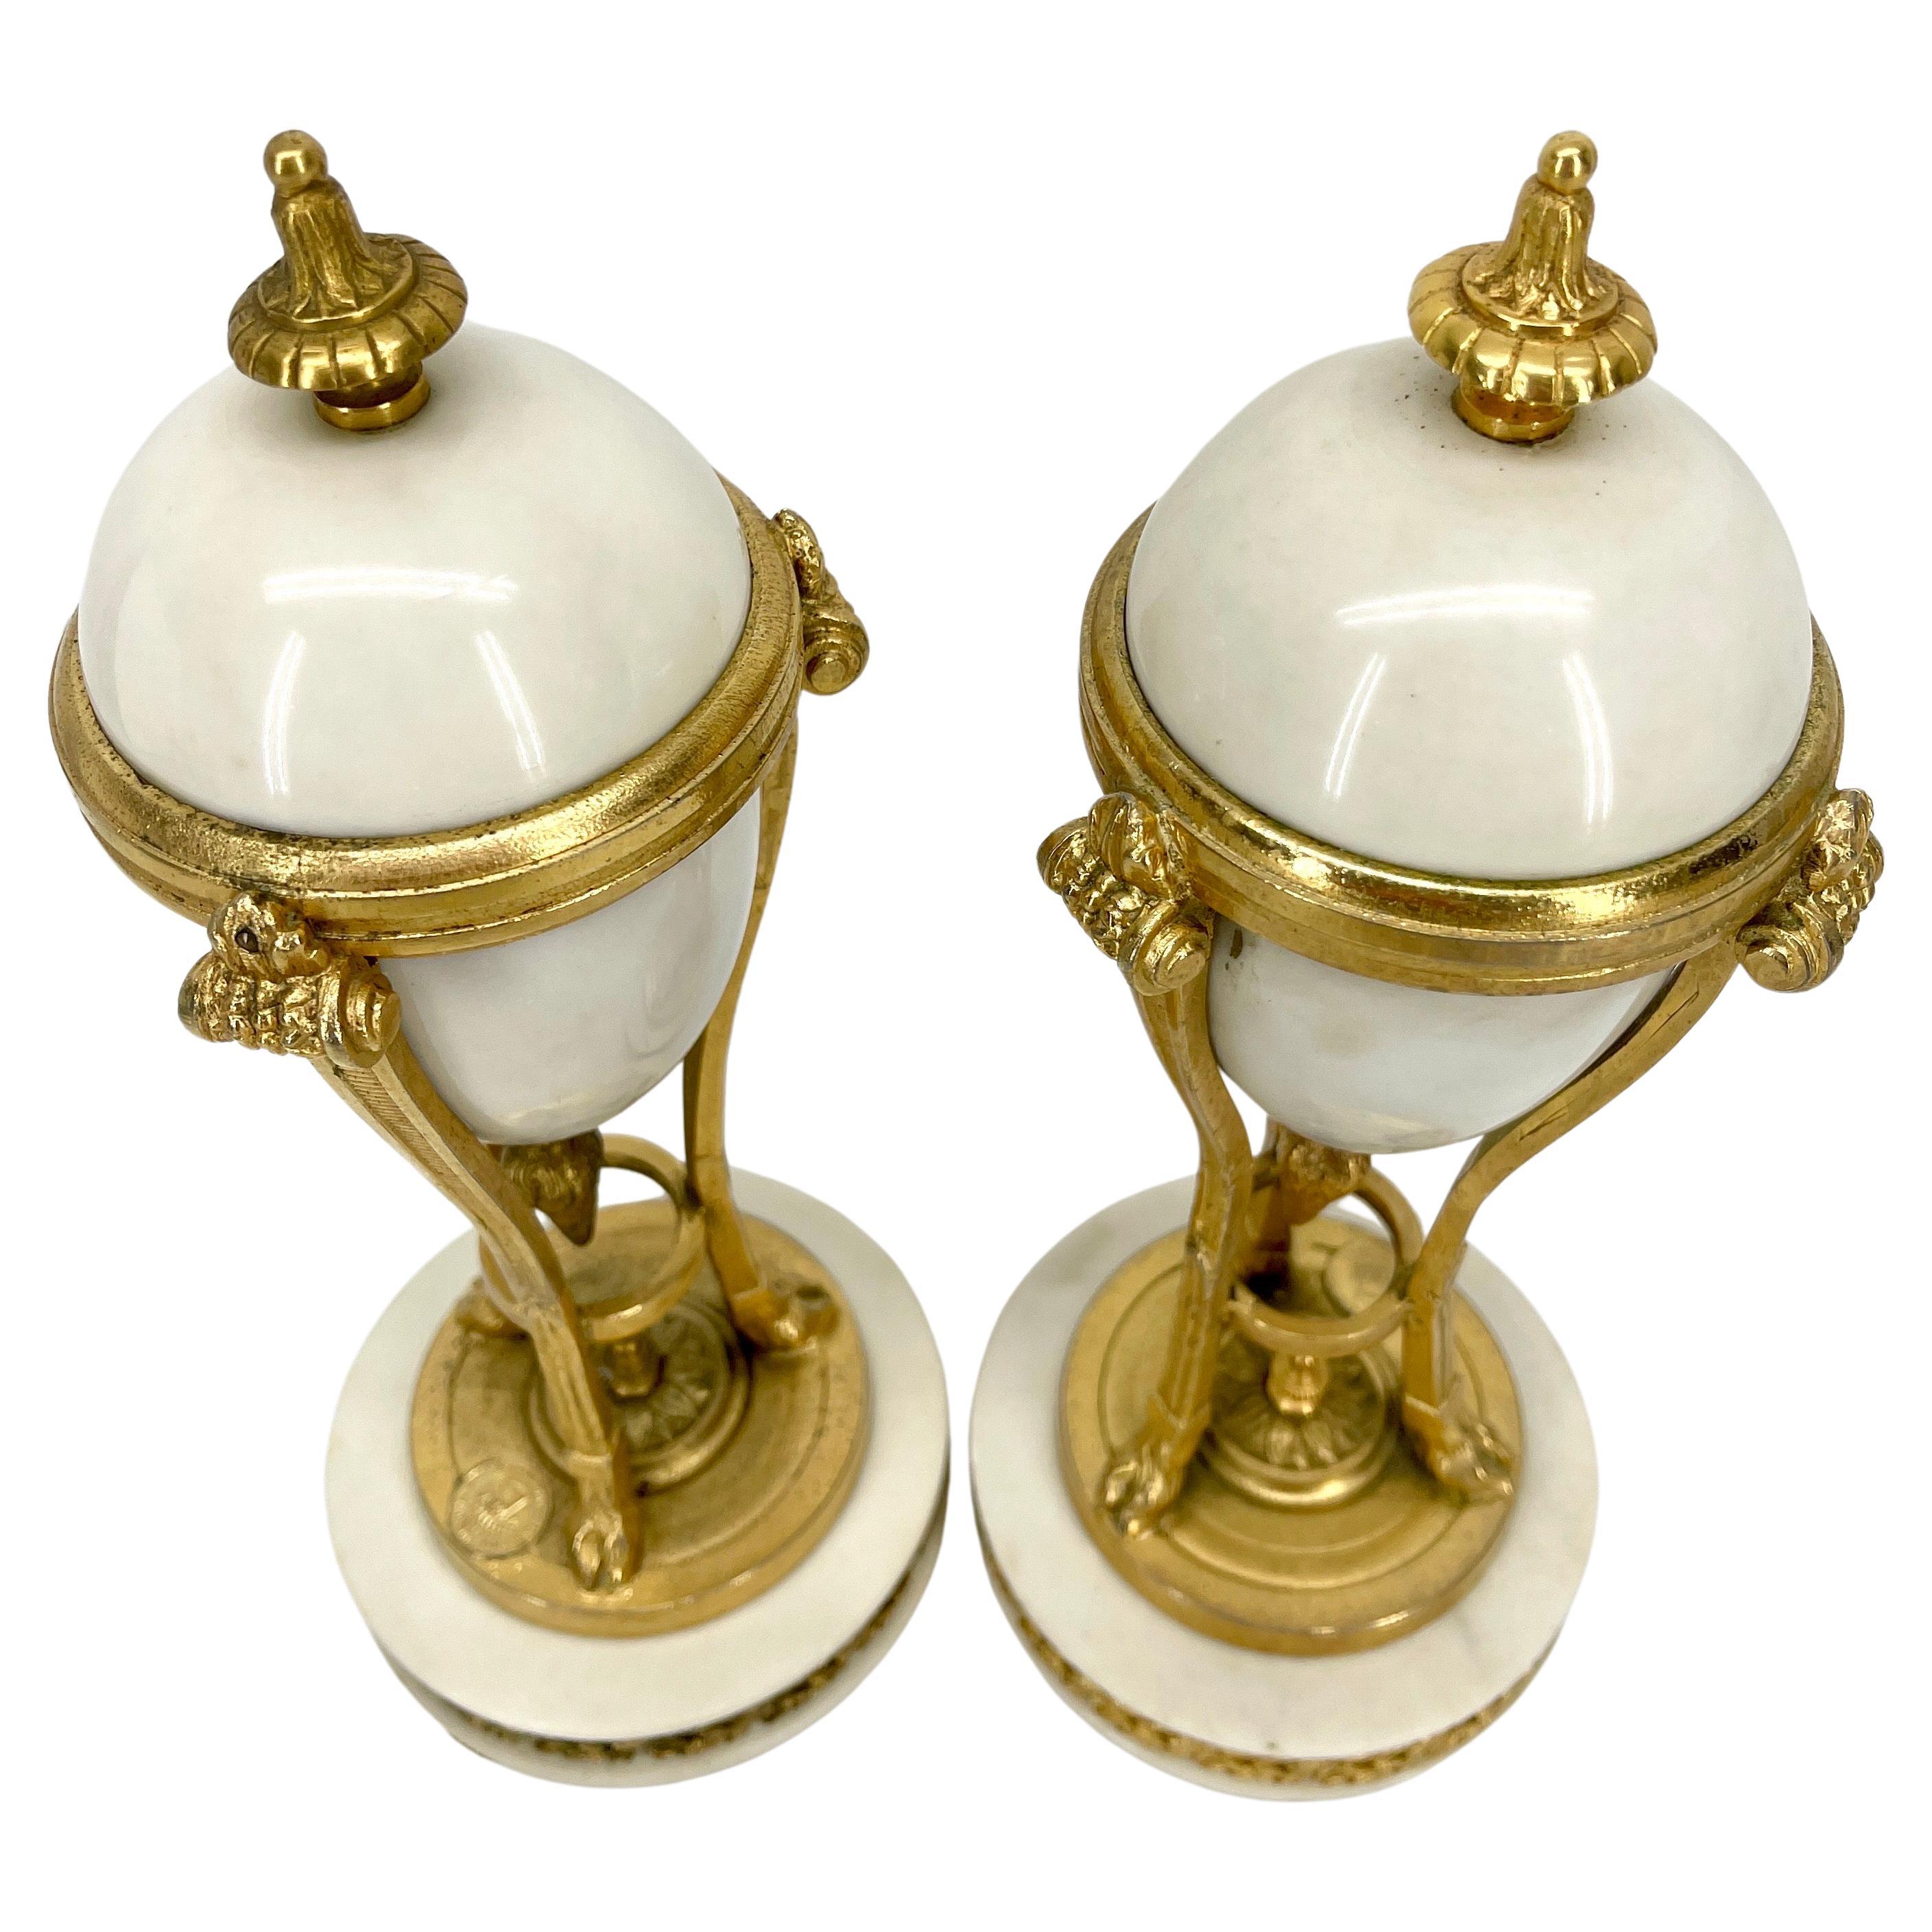 Pair of French Louis XVI style gilt bronze-mounted white marble urns

This pair looks like cassolettes, however the are just urns.

 